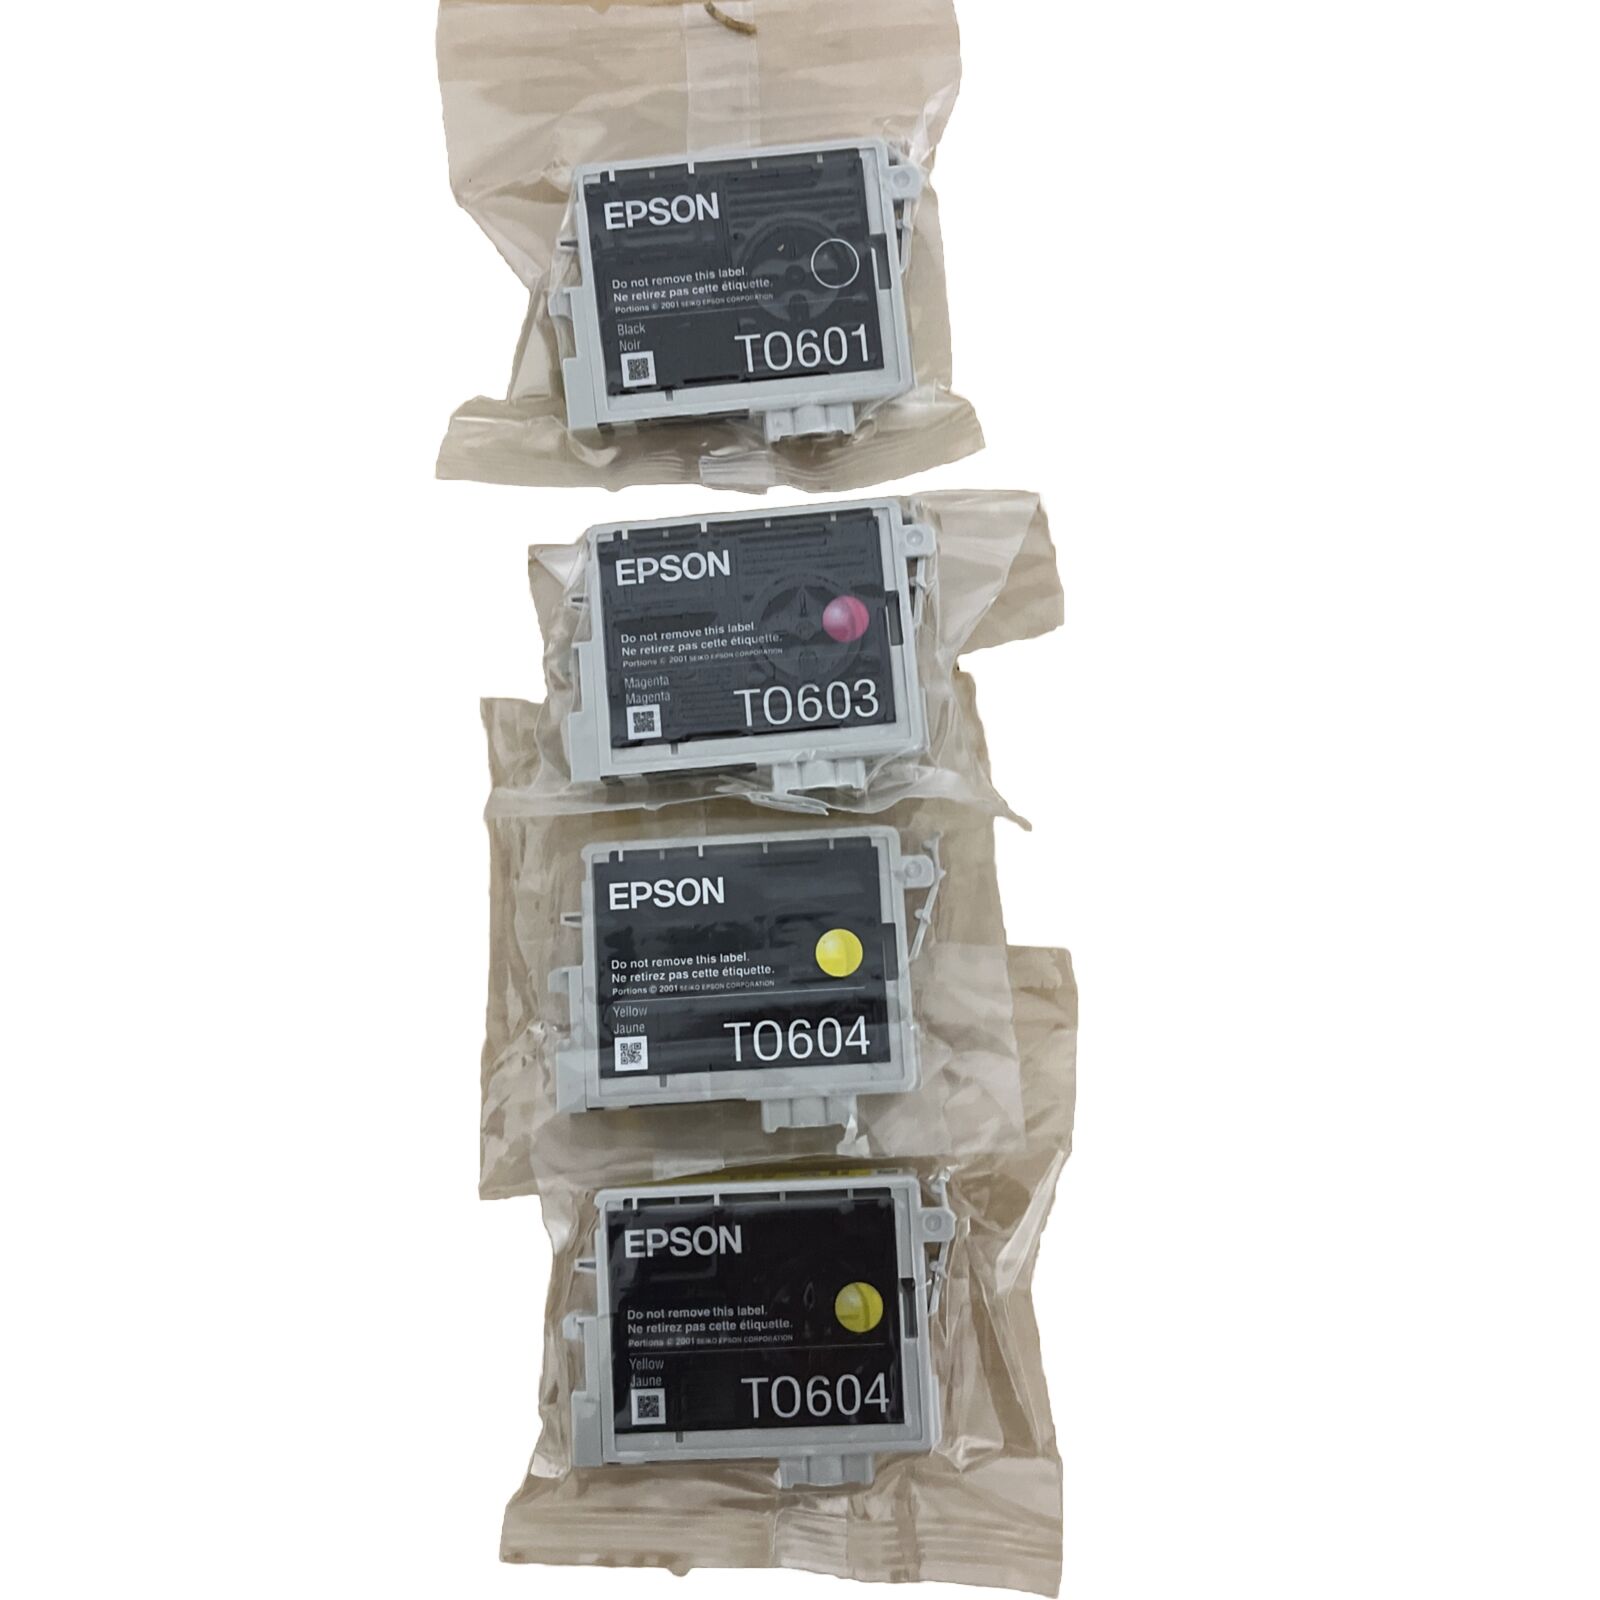 Four Epson Ink Cartridges T0601 (1), T0603 (1), T0604 (2) Factory Sealed